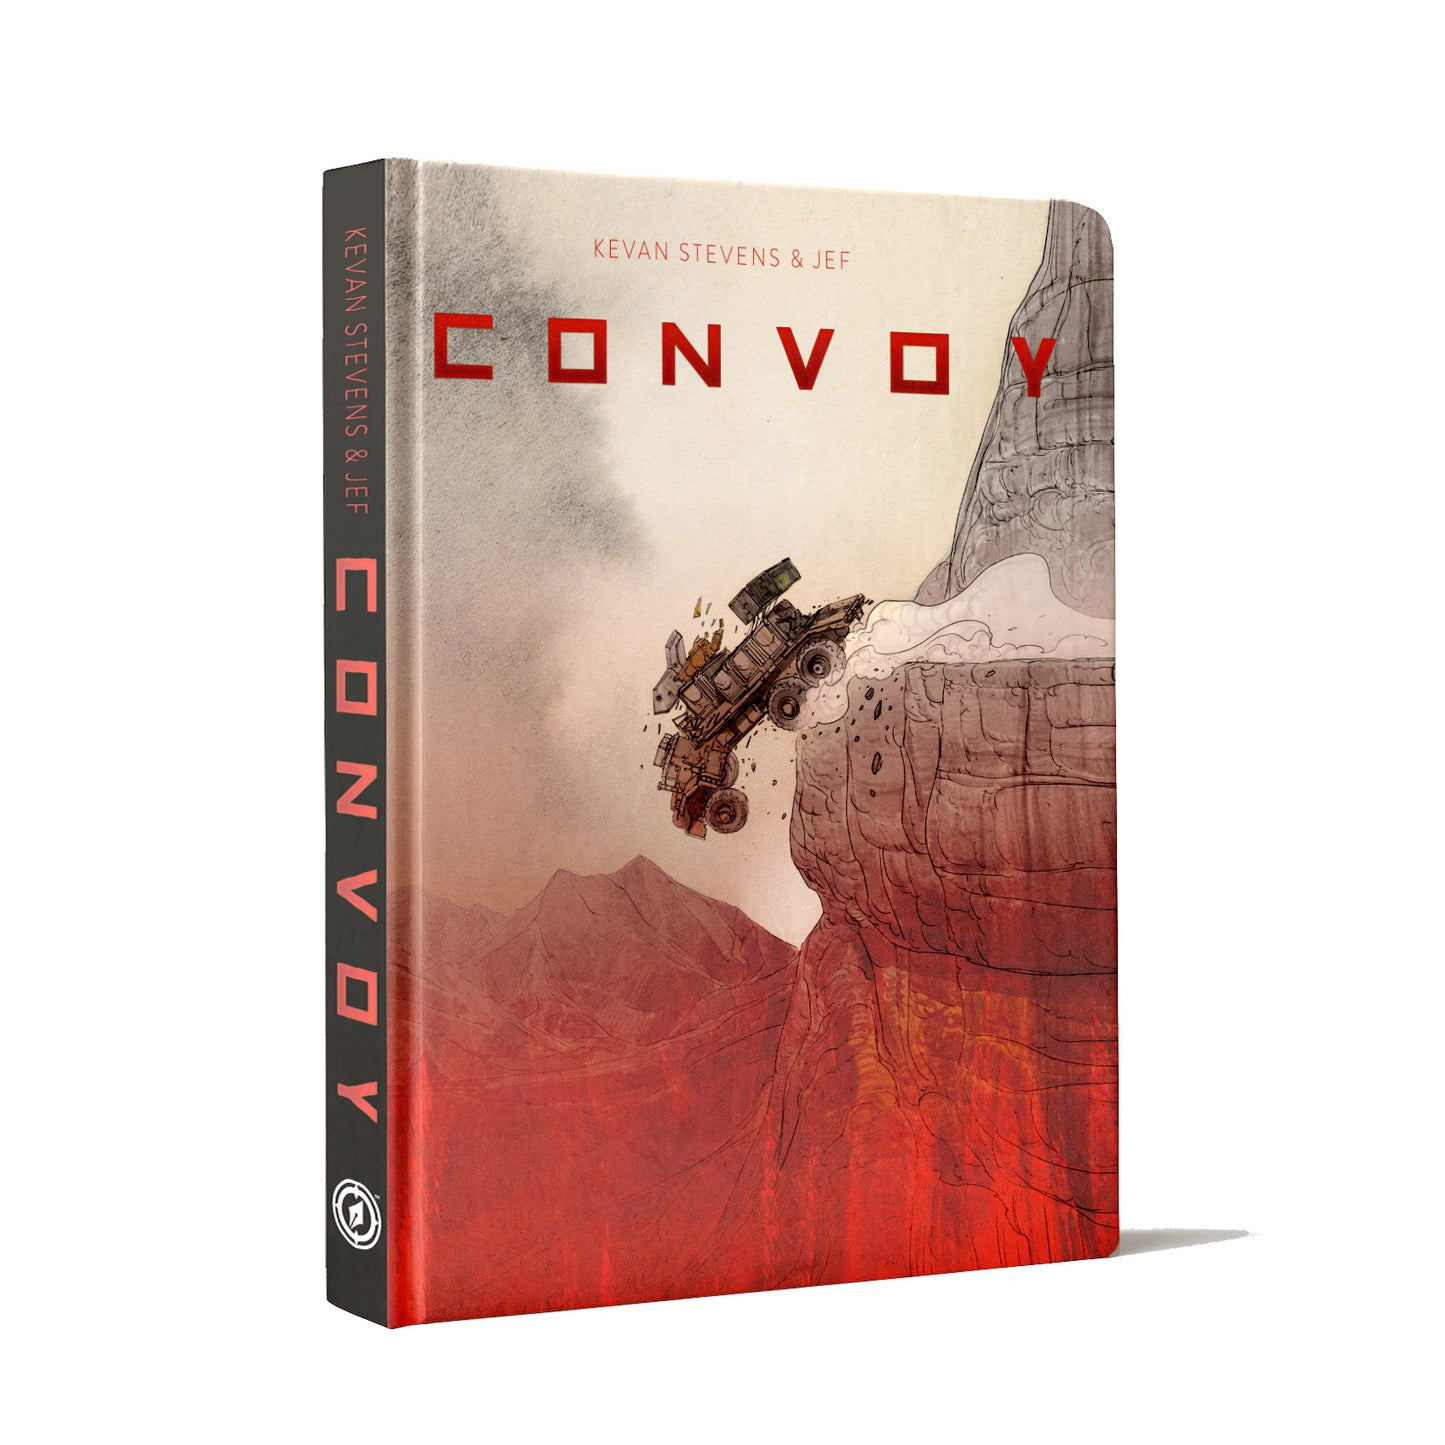 CONVOY by Kevan Stevens and Jef